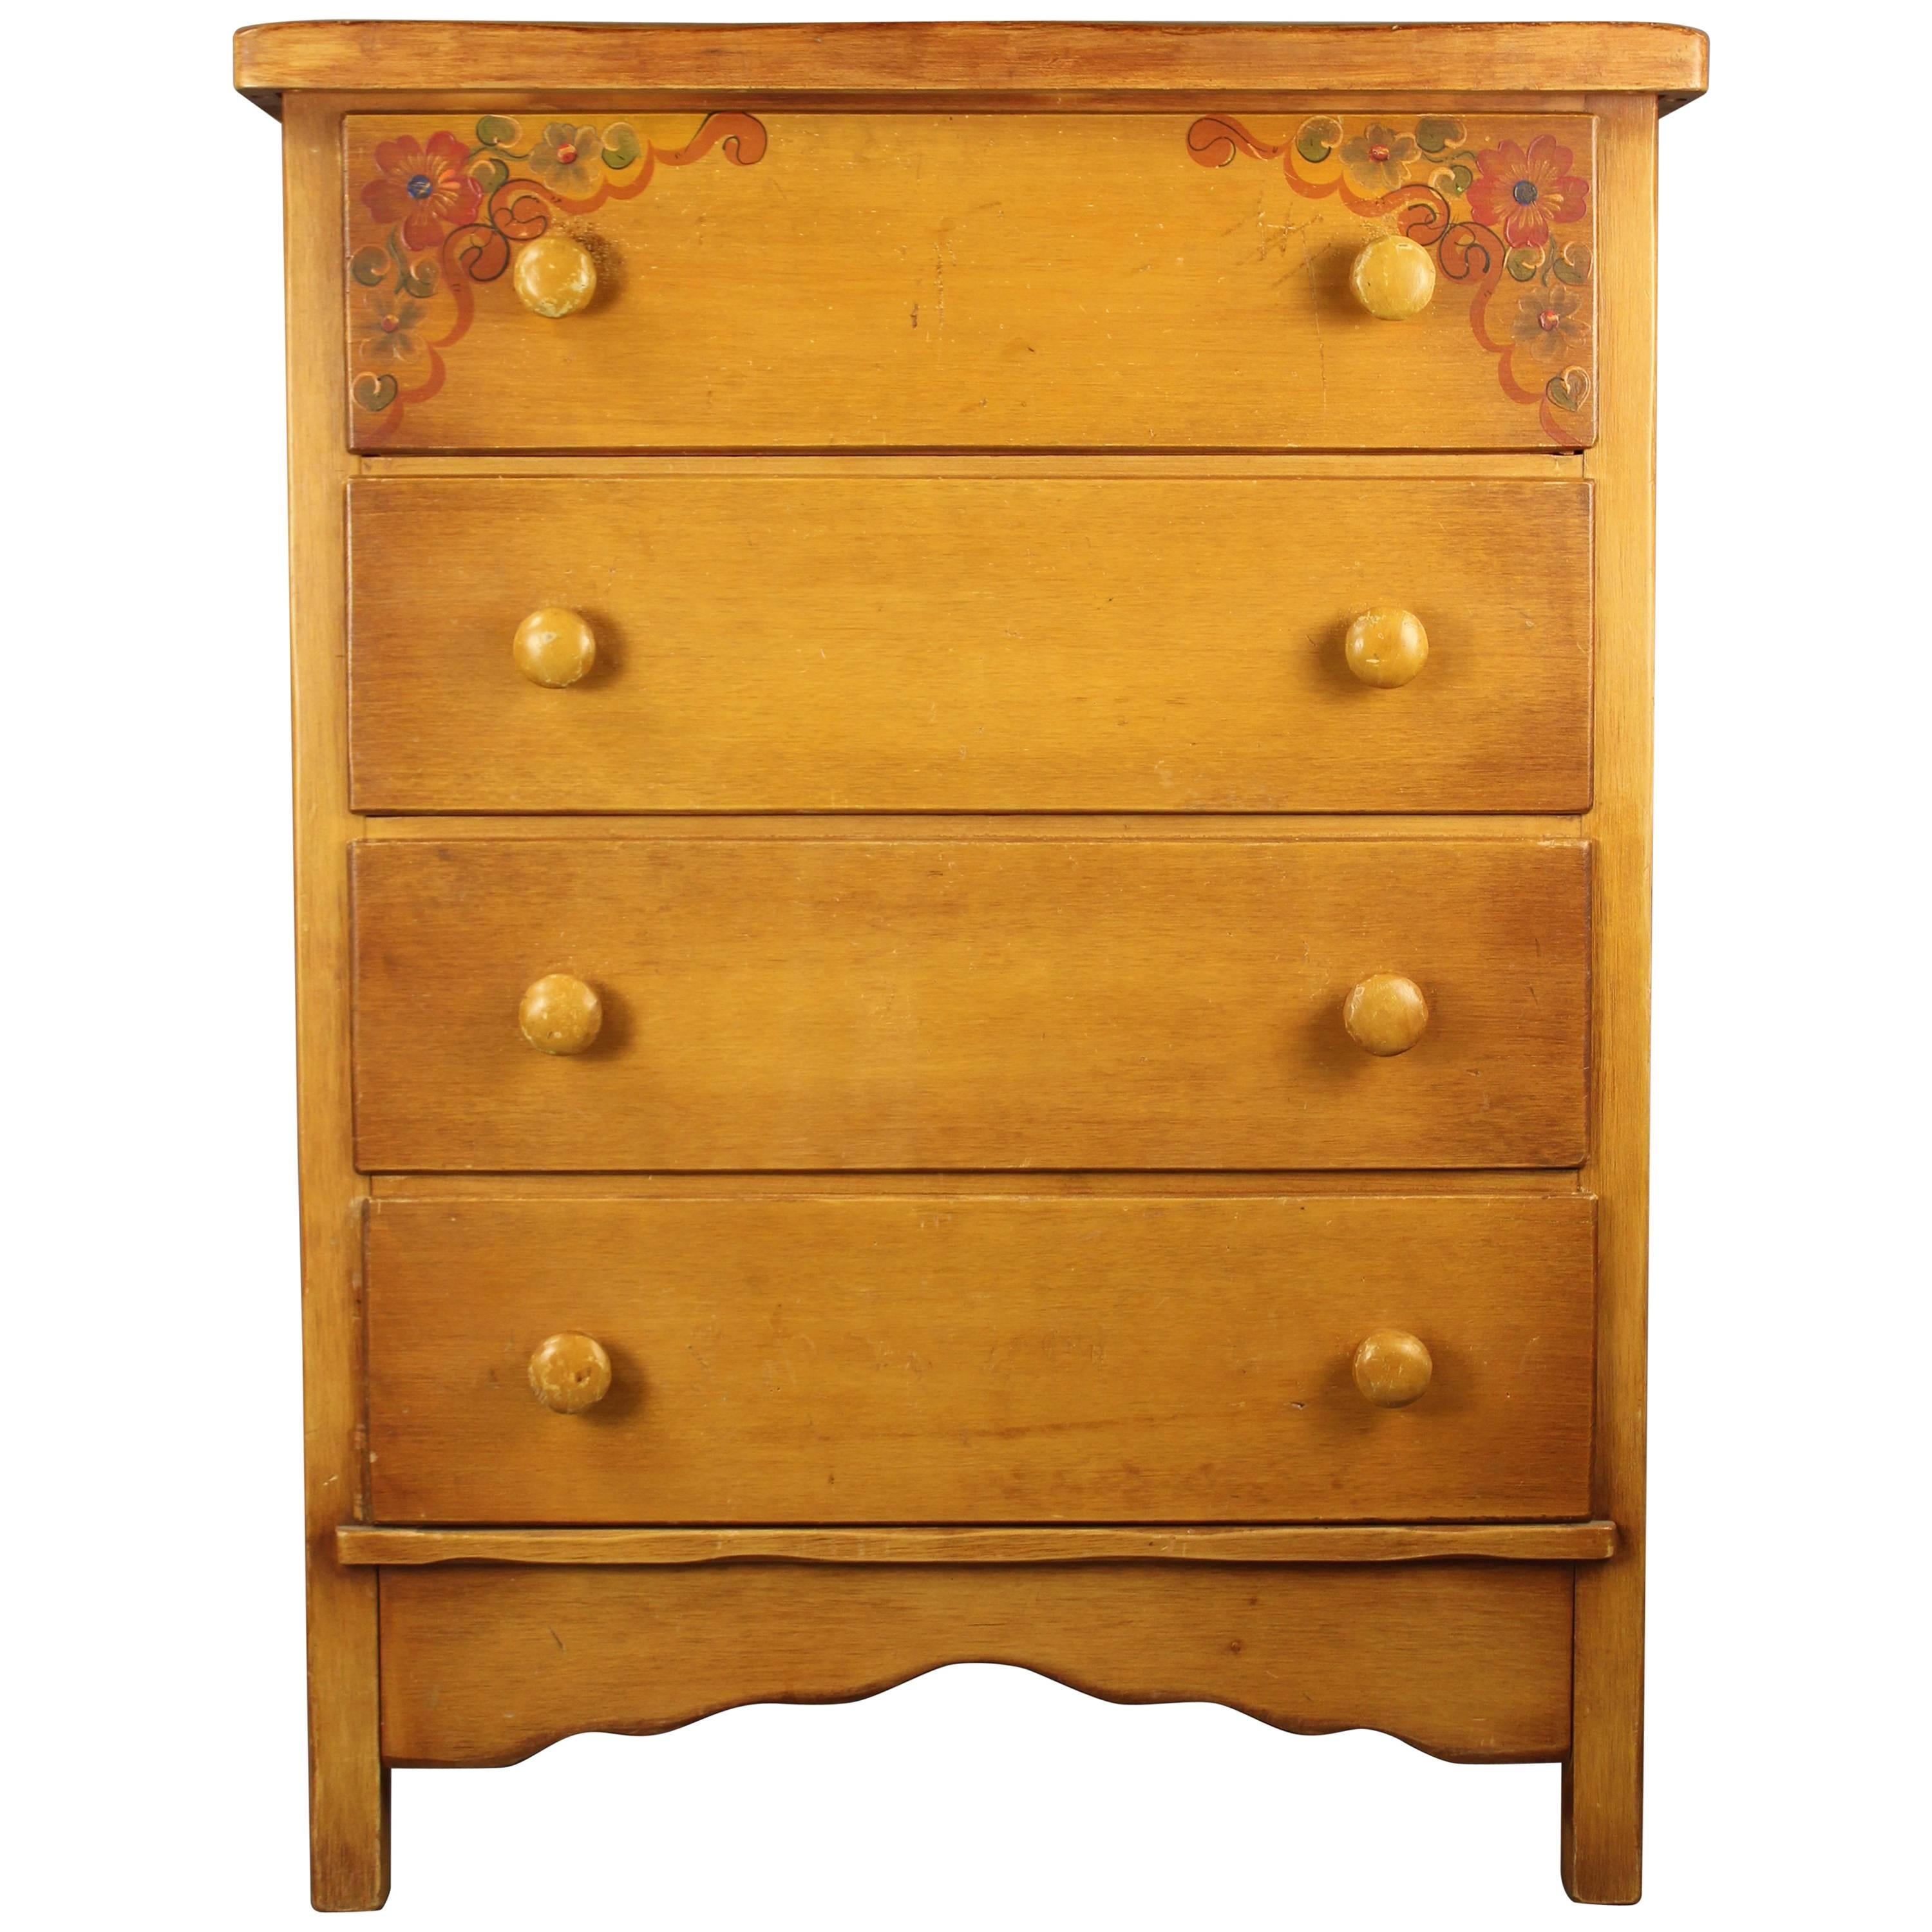 Coronado Four-Drawer Dresser with Hand-Painted Flowers